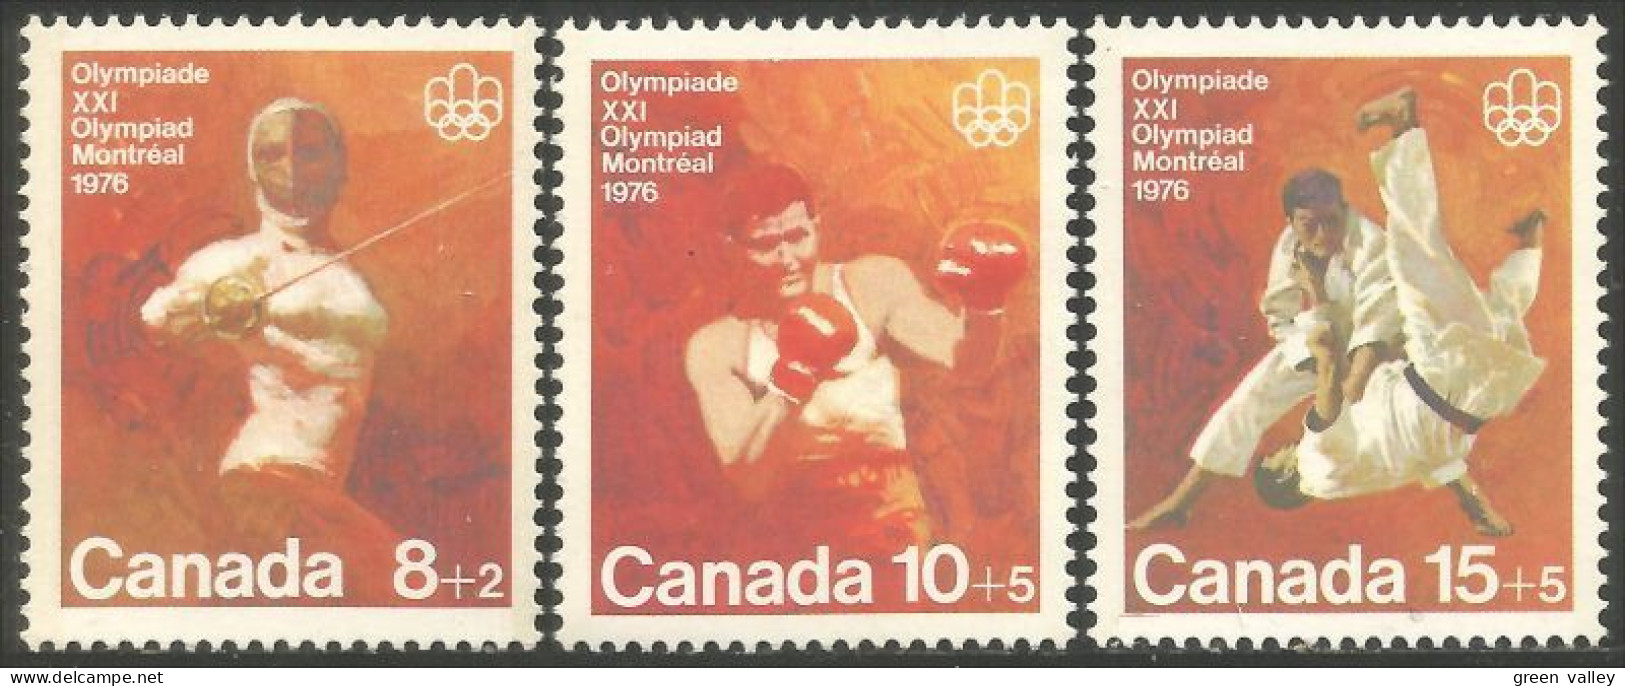 Canada Jeux Olympiques Montreal 1976 Olympic Games MNH ** Neuf SC (CB-07-09c) - Verano 1976: Montréal